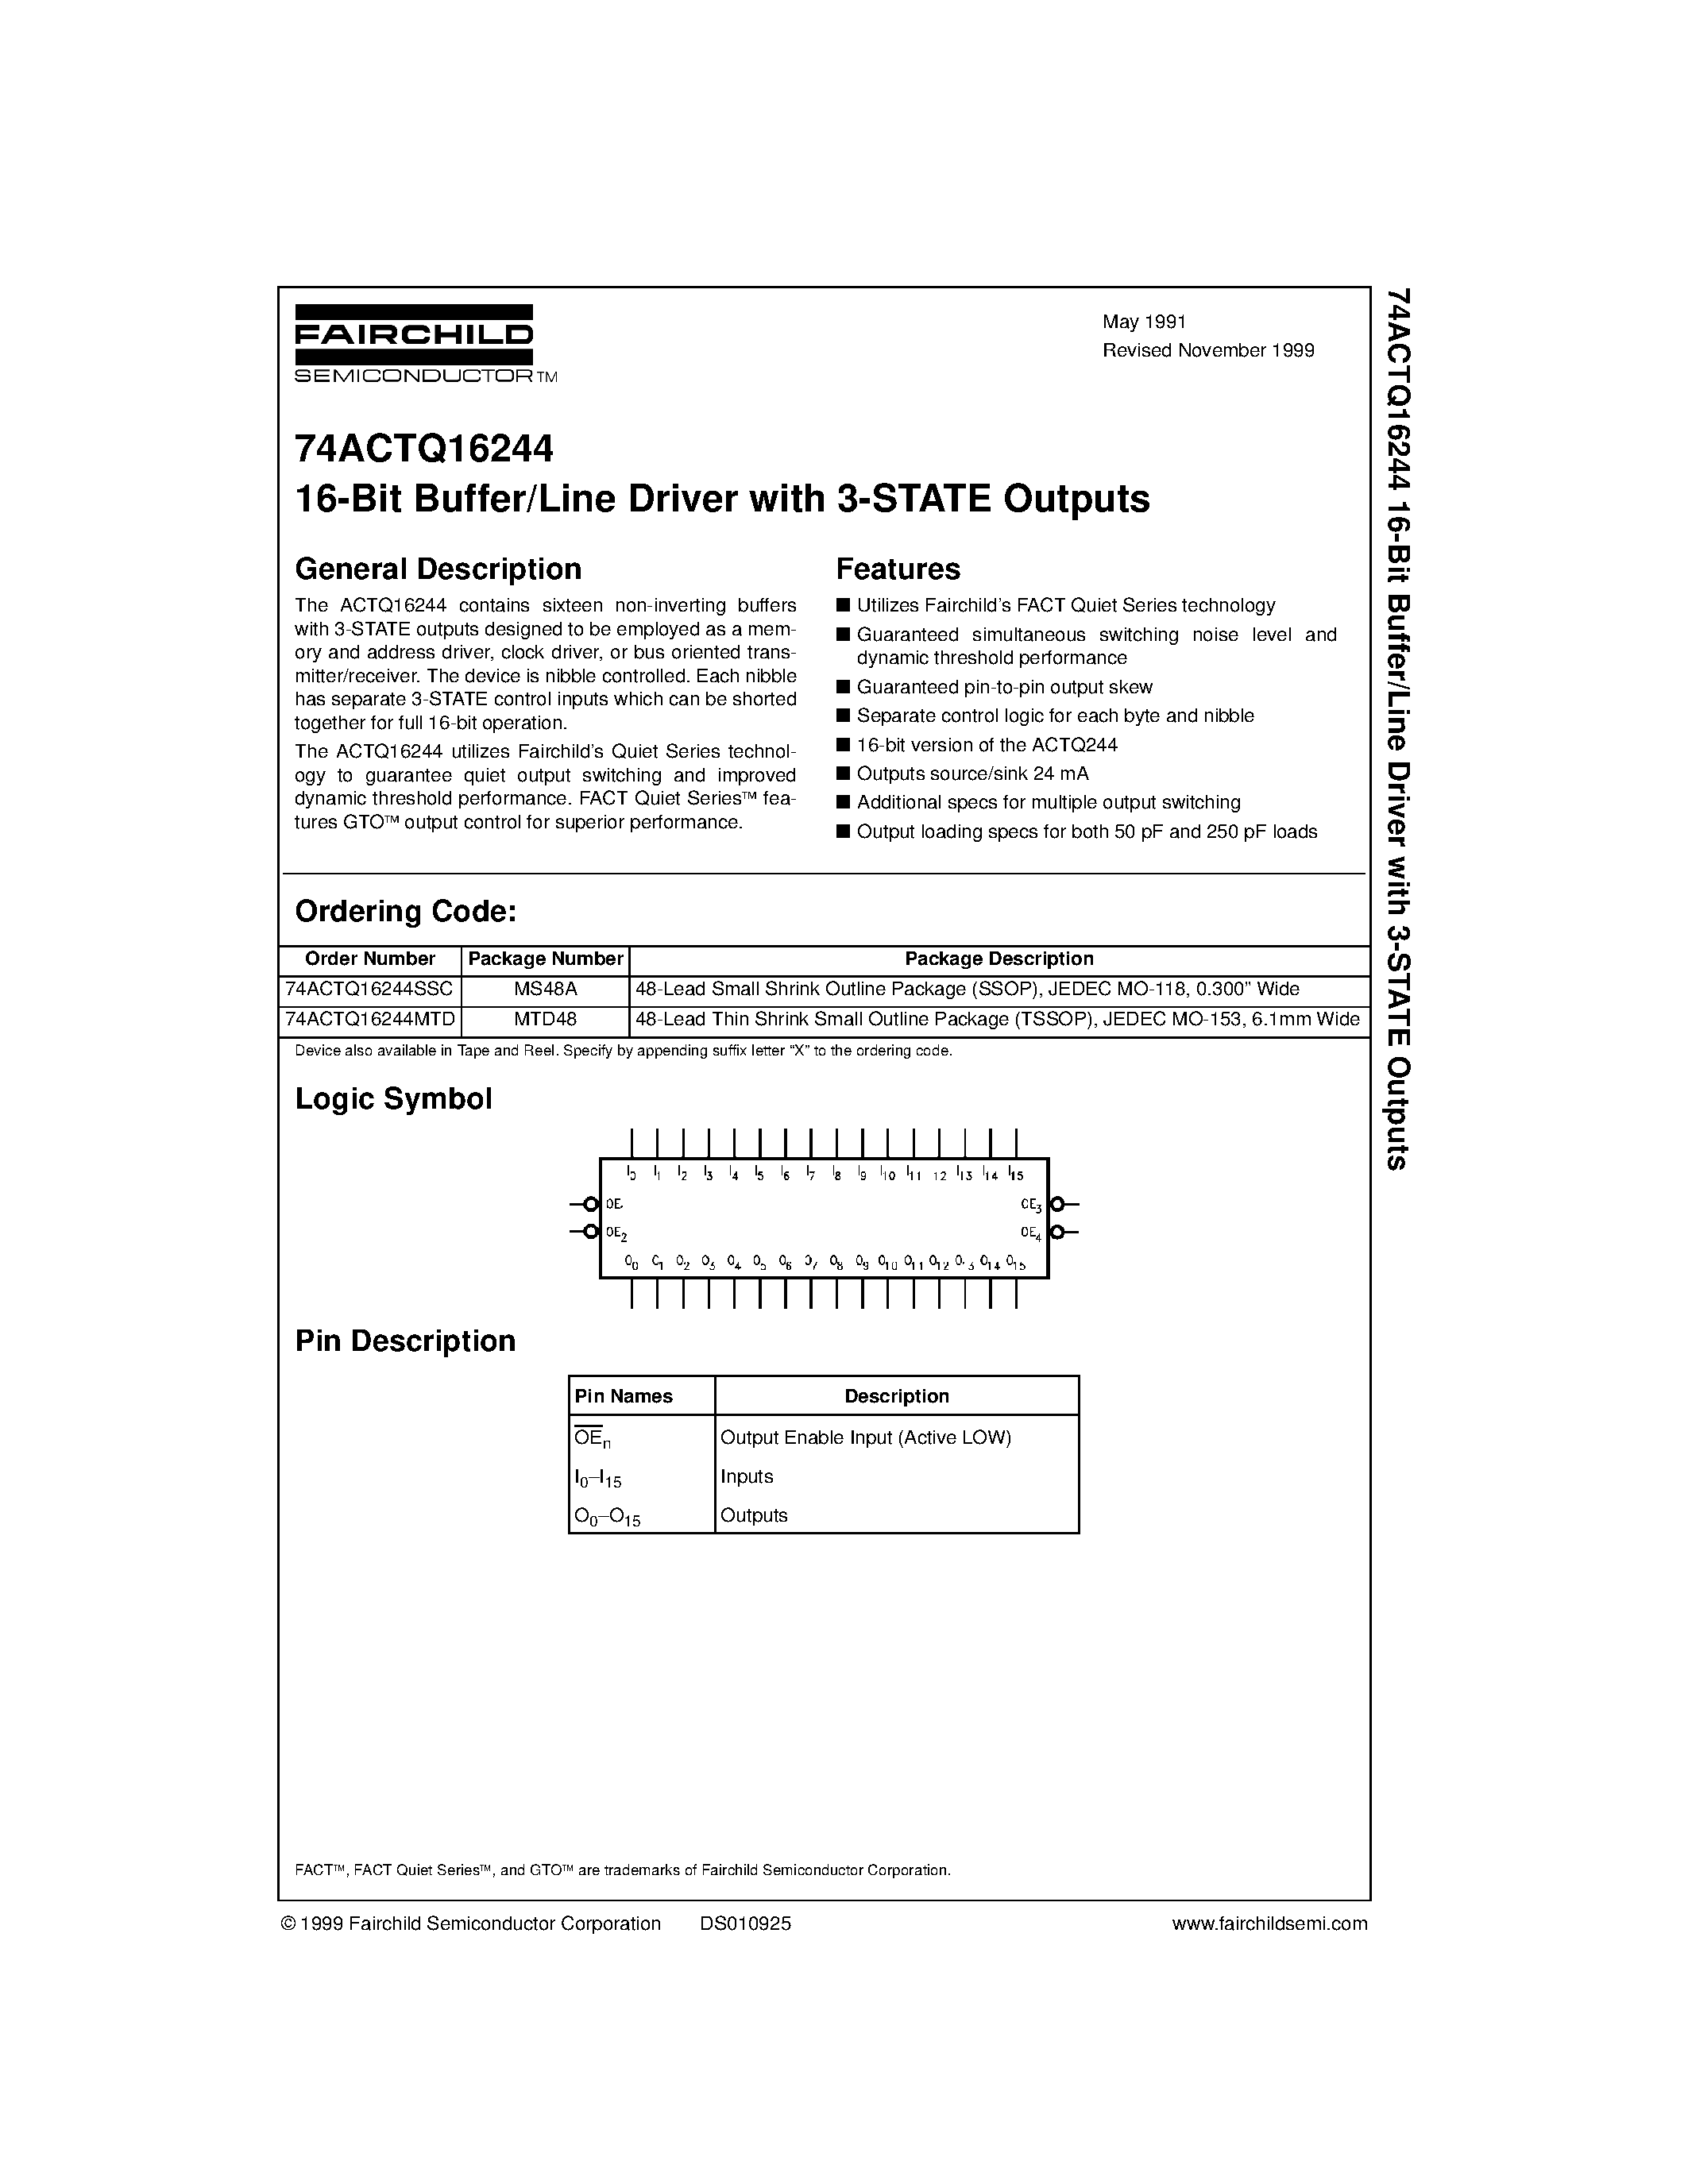 Datasheet 74ACTQ16244MTD - 16-Bit Buffer/Line Driver with 3-STATE Outputs page 1